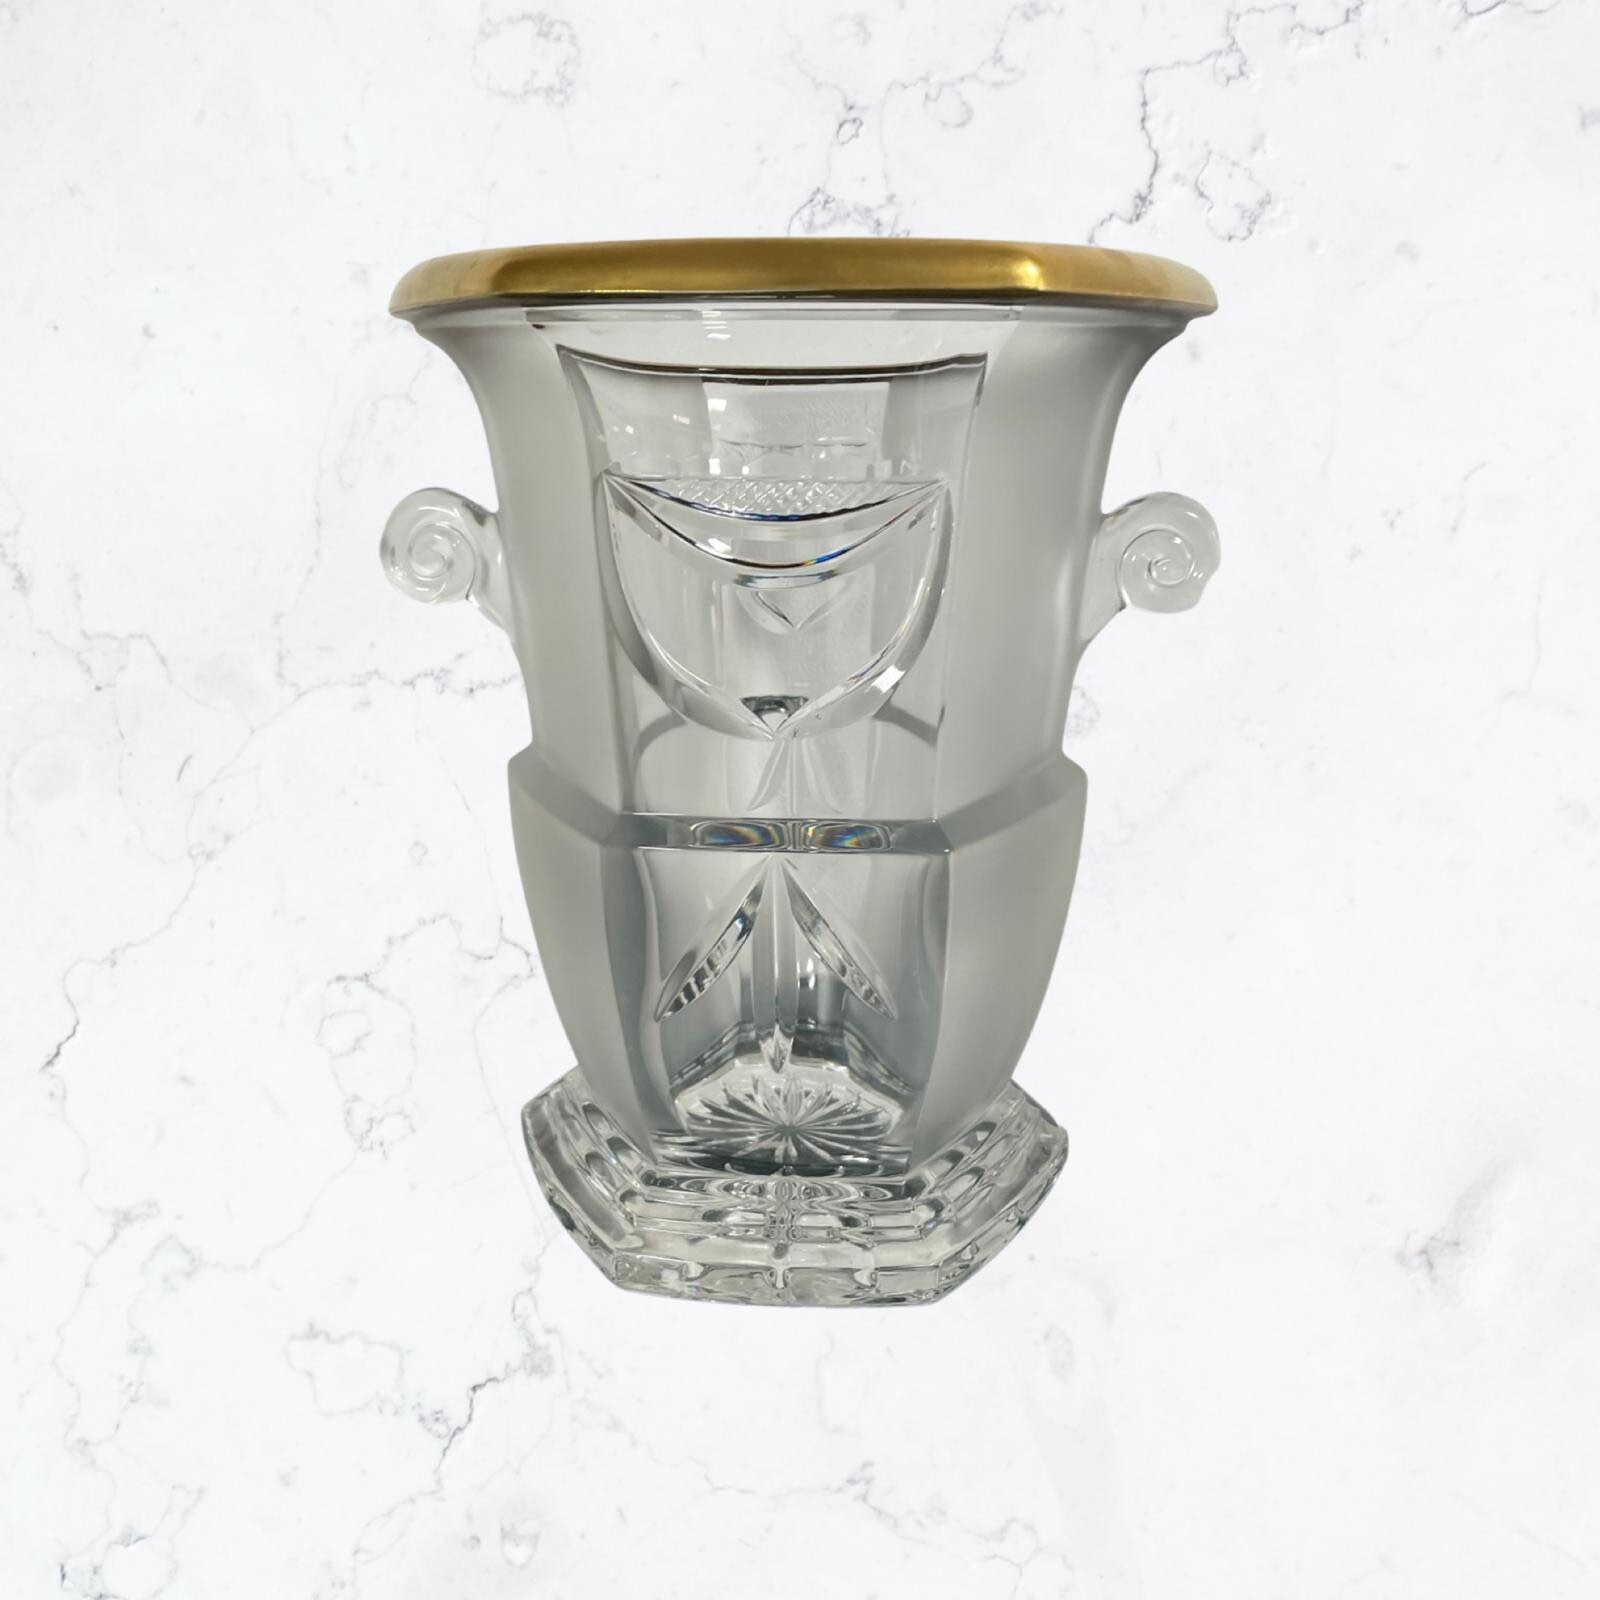 Champagne Art Déco Style Chrystal Ice Bucket Seau à Champagne